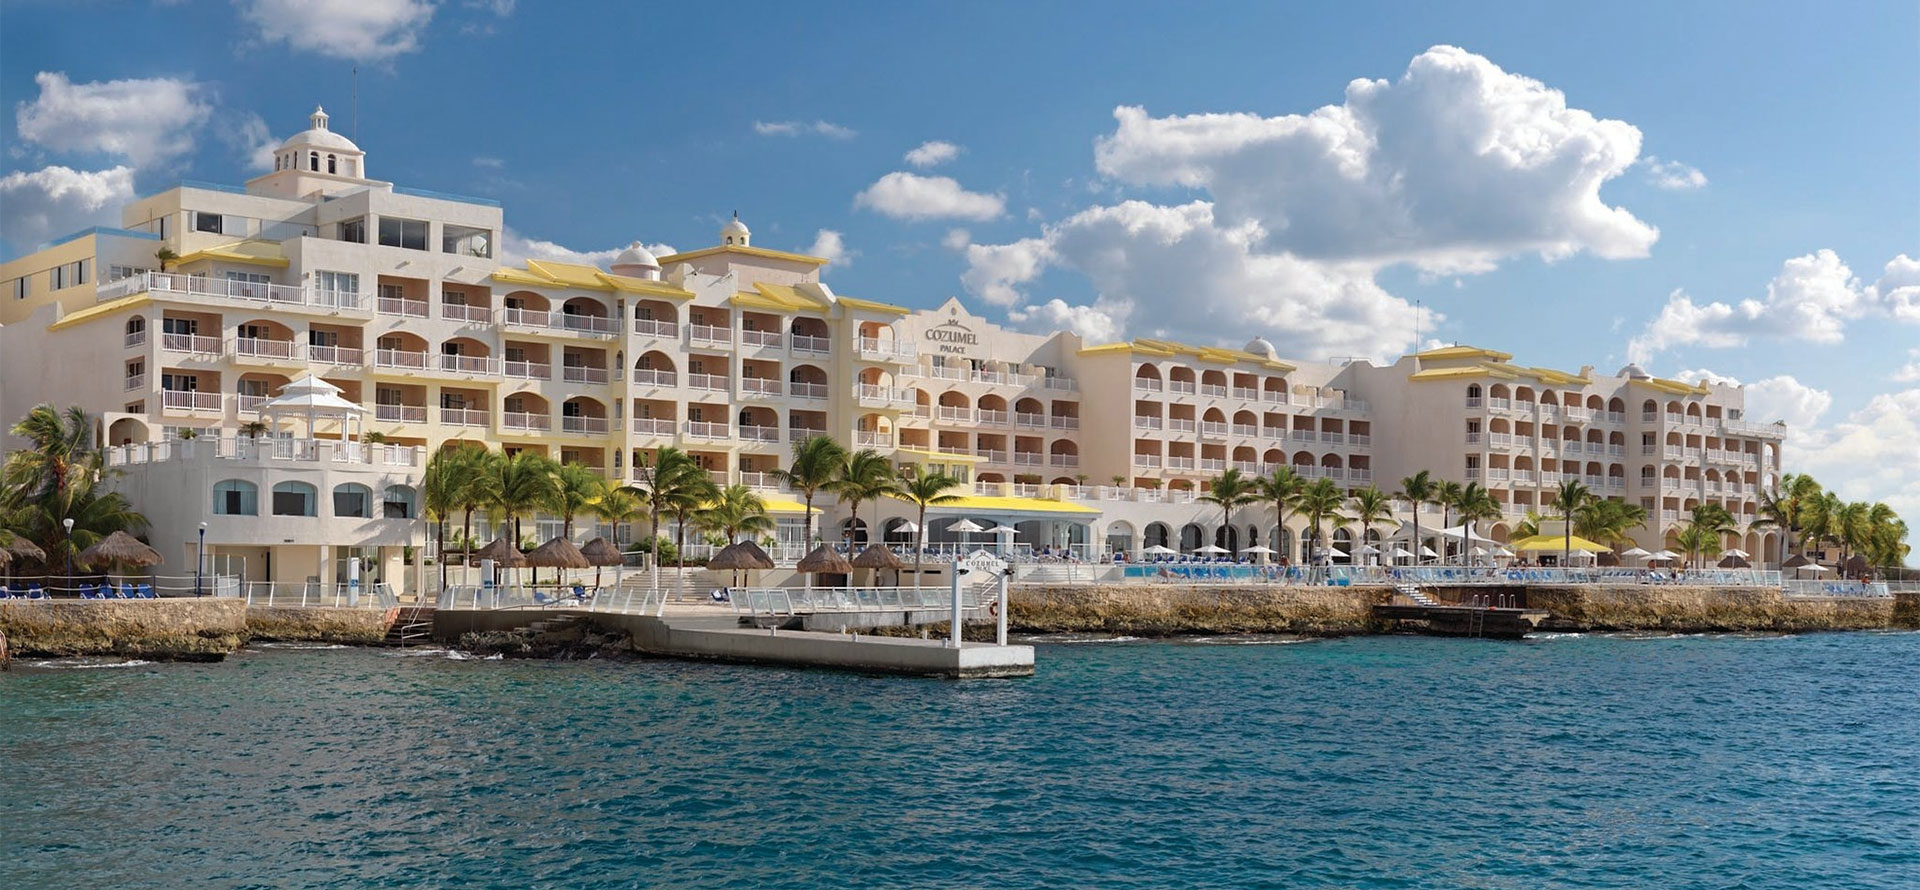 Cozumel All-Inclusive Family Resorts.